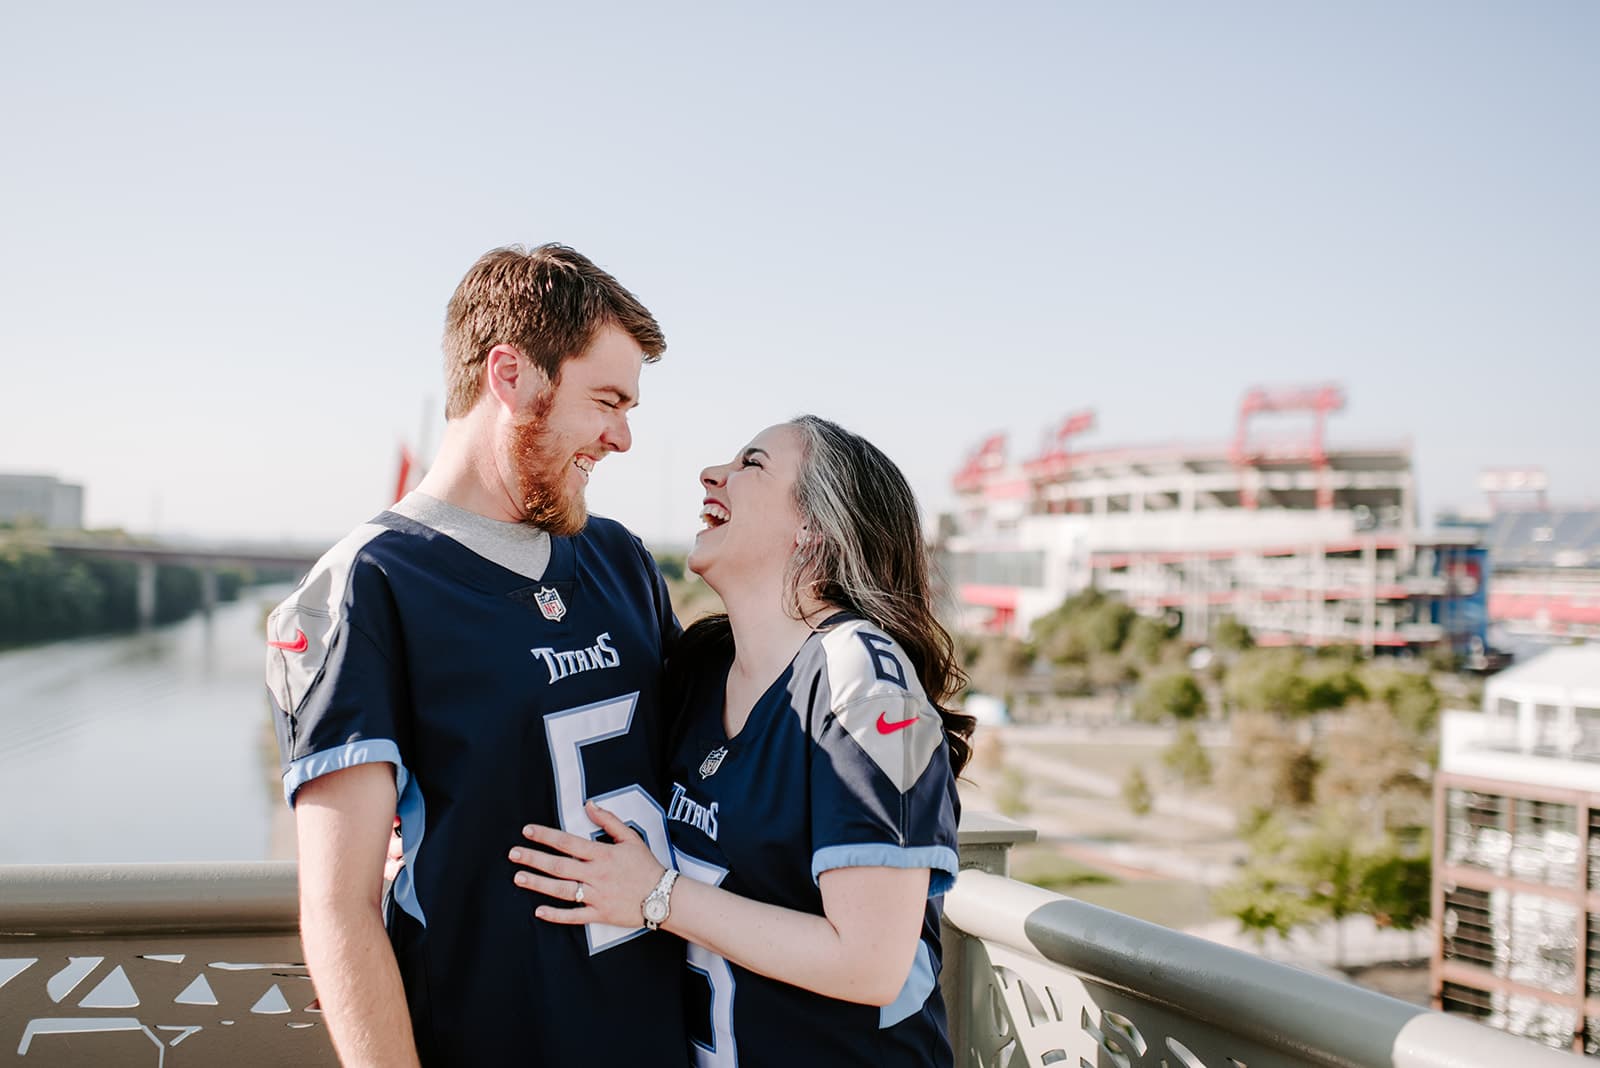 Fun Downtown Engagement Shoot from Sara Bill Photography featured on Nashville Bride Guide